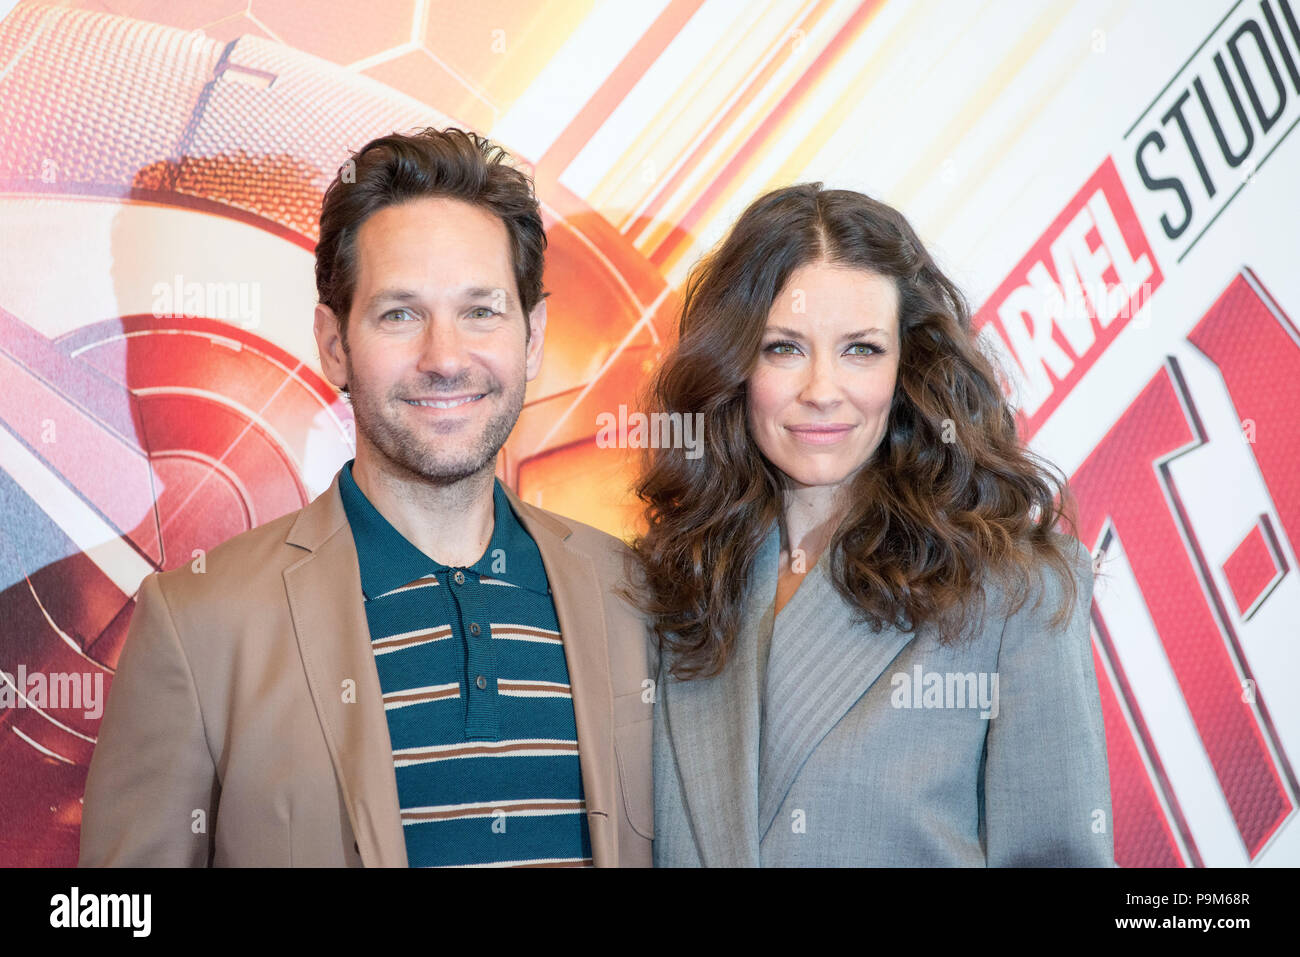 Rome, Italy. 19th July 2018. Rome, Italy. 19th July, 2018. Paul Rudd and Evangeline Lilly attending the photocall of Ant-Man and the Wasp at Hotel De Russie in Rome Credit: Silvia Gerbino/Alamy Live News Credit: Silvia Gerbino/Alamy Live News Stock Photo